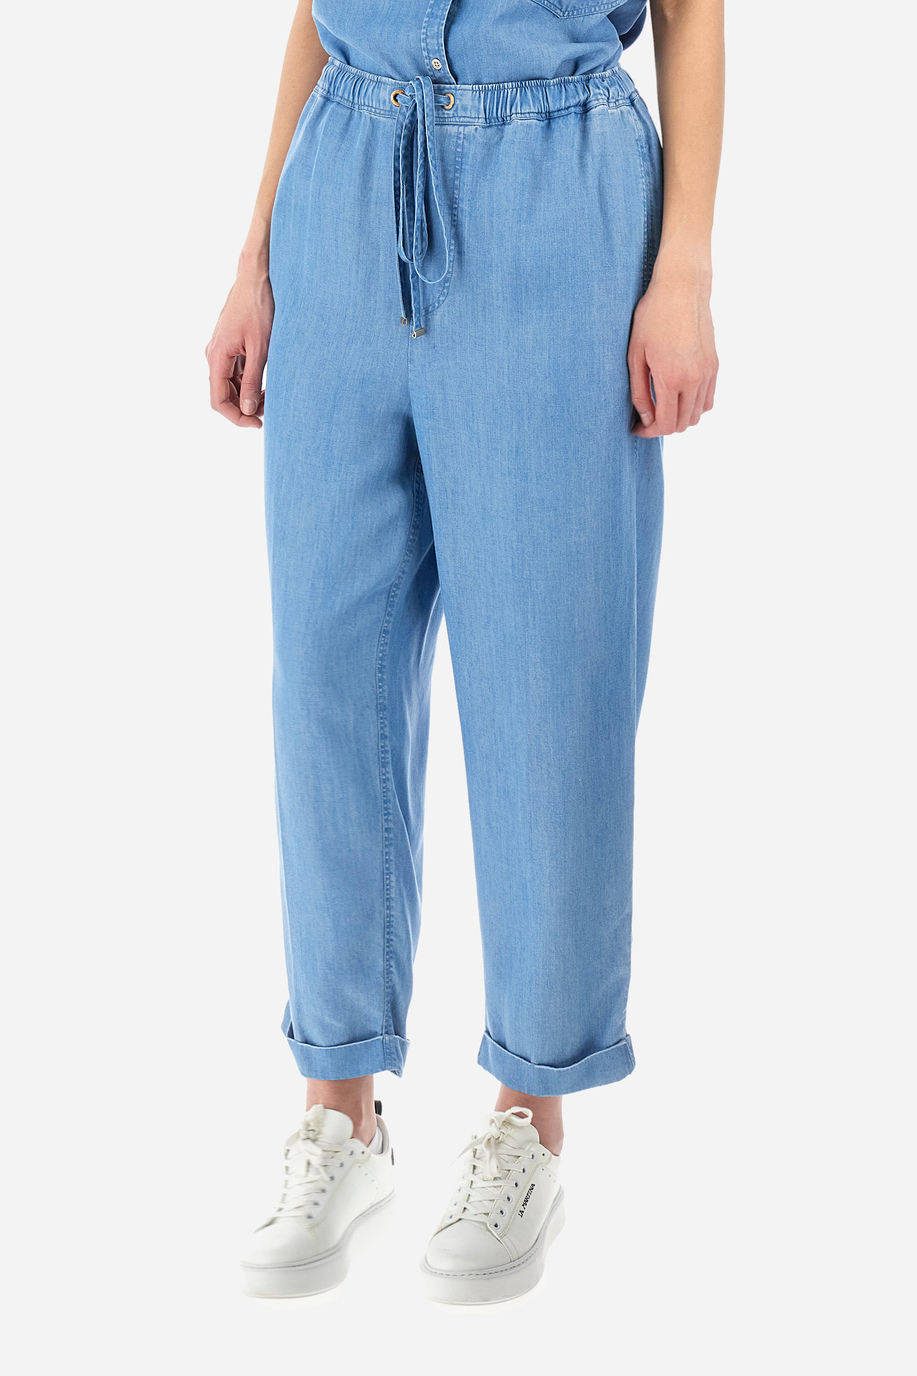 Regular-fit trousers in an ecological fabric - Yevette - Women | La Martina - Official Online Shop